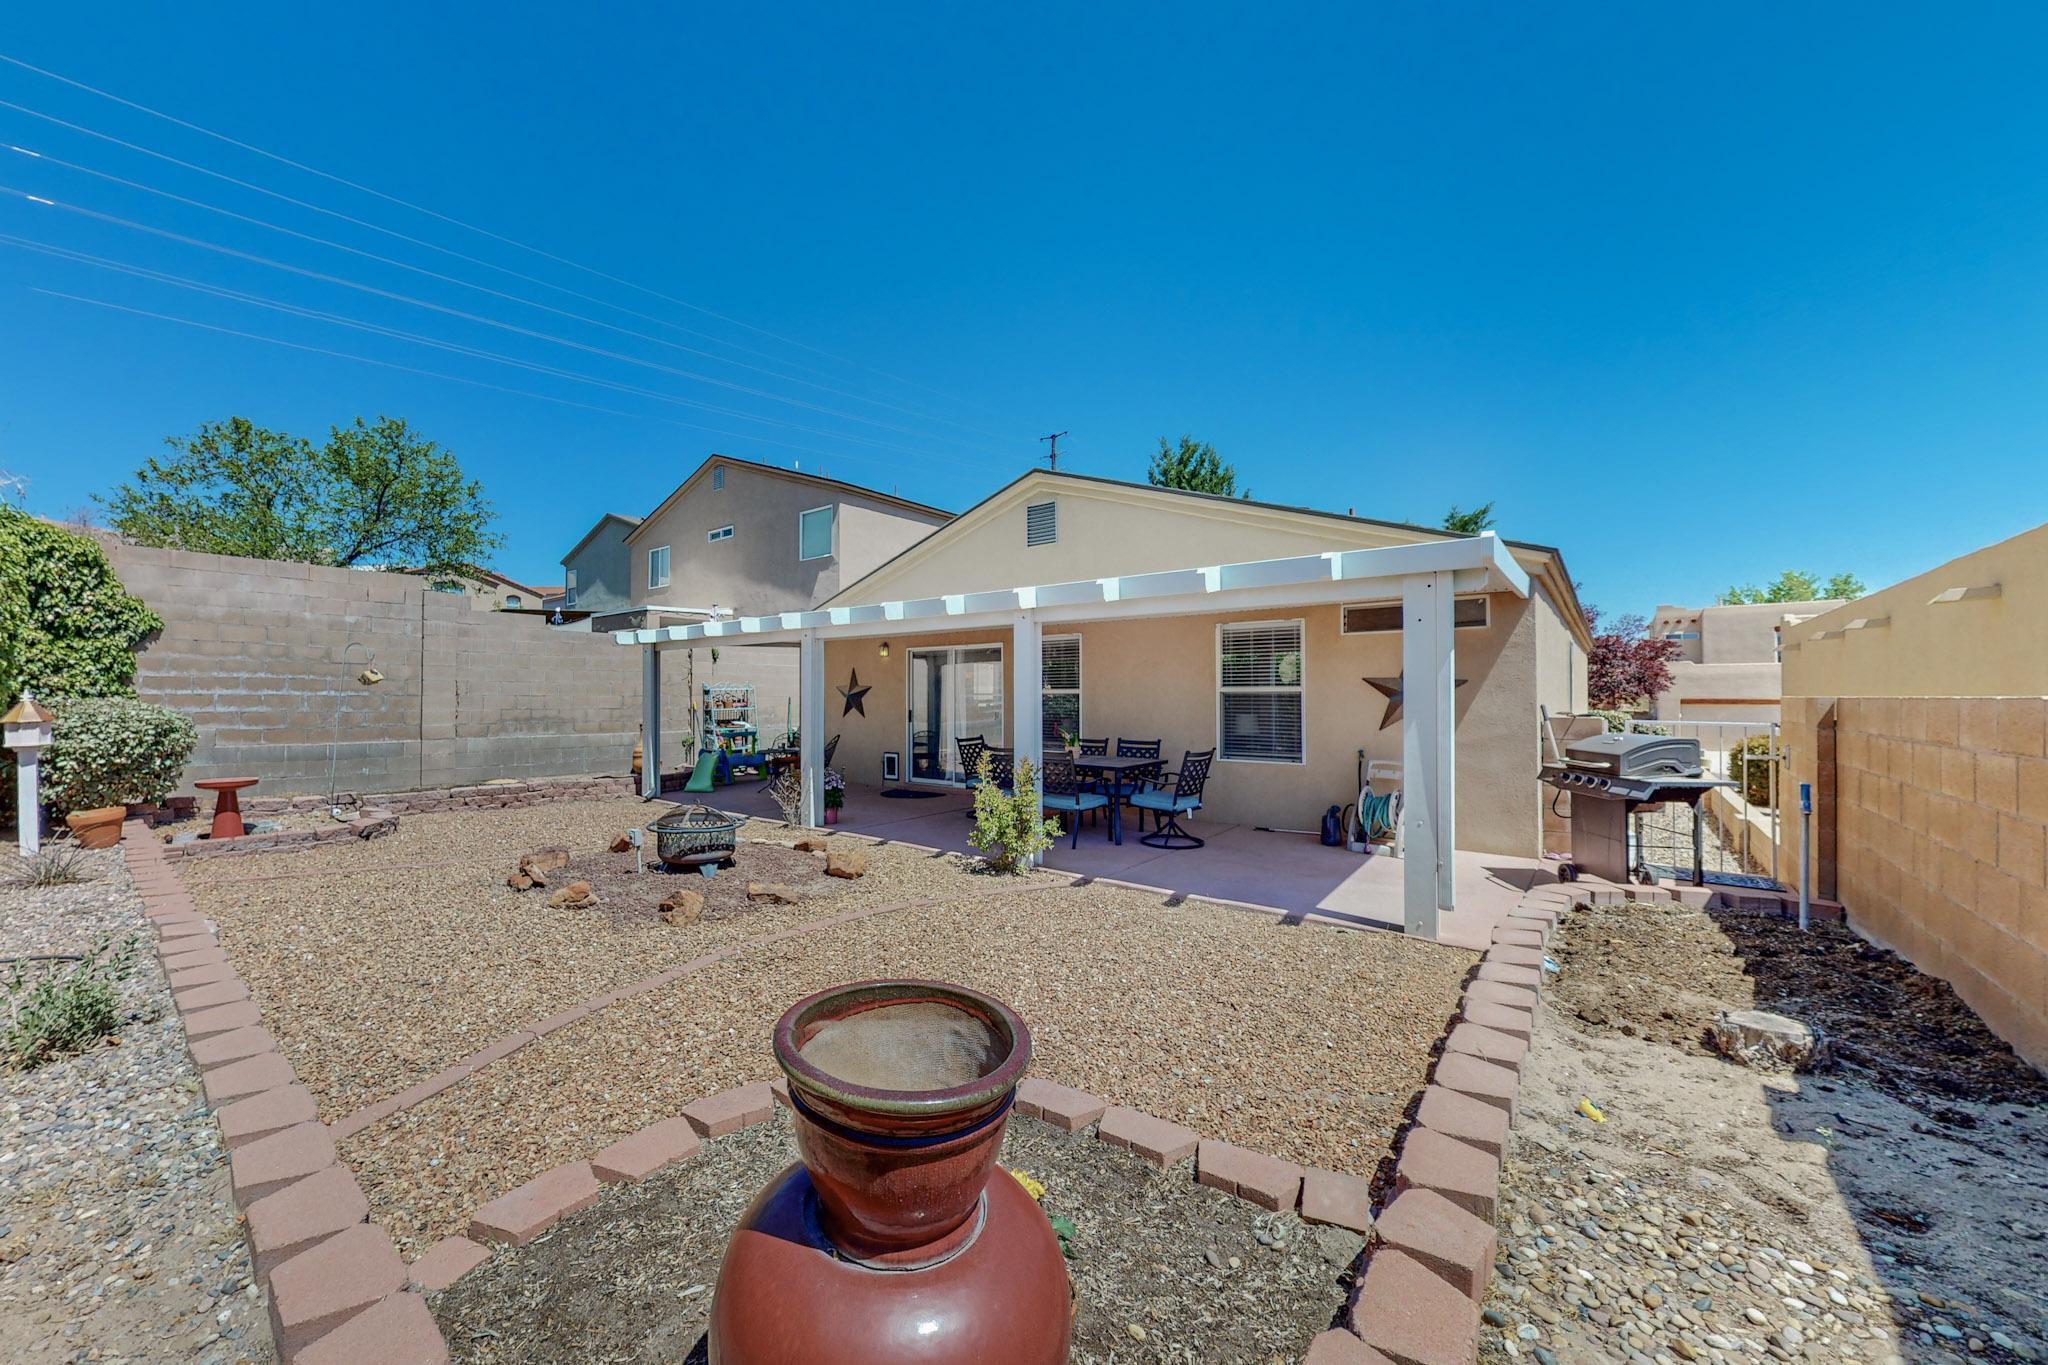 8211 Wolverine Drive NW, Albuquerque, New Mexico 87120, 3 Bedrooms Bedrooms, ,2 BathroomsBathrooms,Residential,For Sale,8211 Wolverine Drive NW,1061553